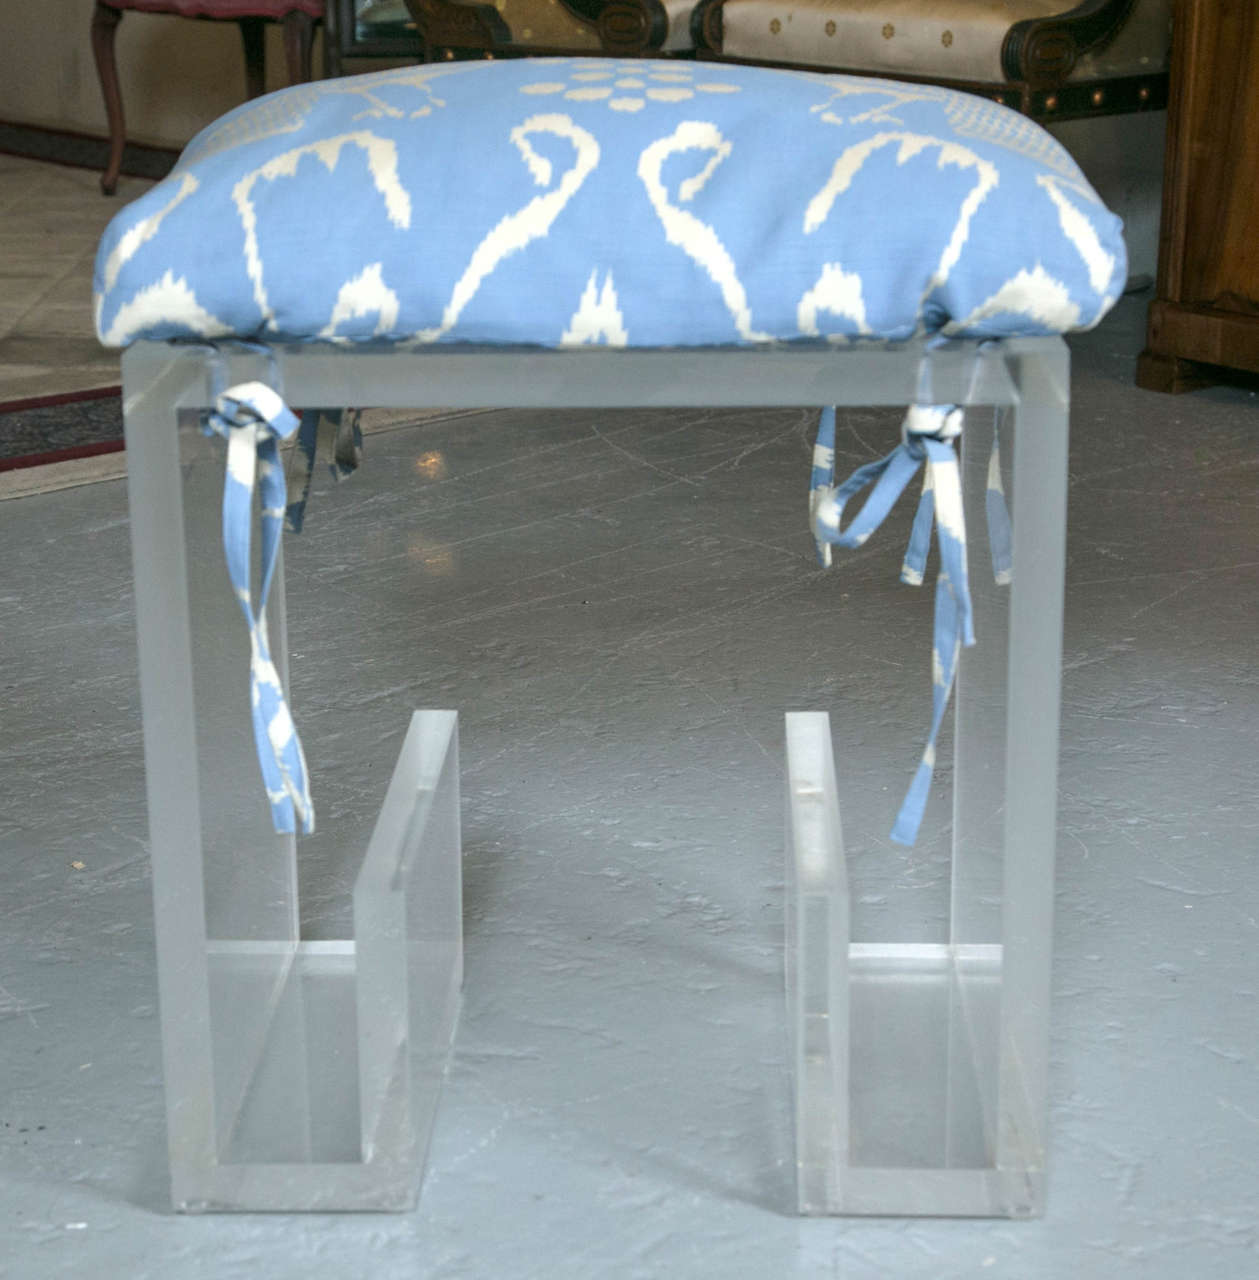 Pair of solid Lucite modern benches manner of Karl Springer. This fine pair of double U-shaped benches were purchased from a NYC apartment and featured in a magazine lay out in the late 1970s. Having every attribution to Springer we simply do not